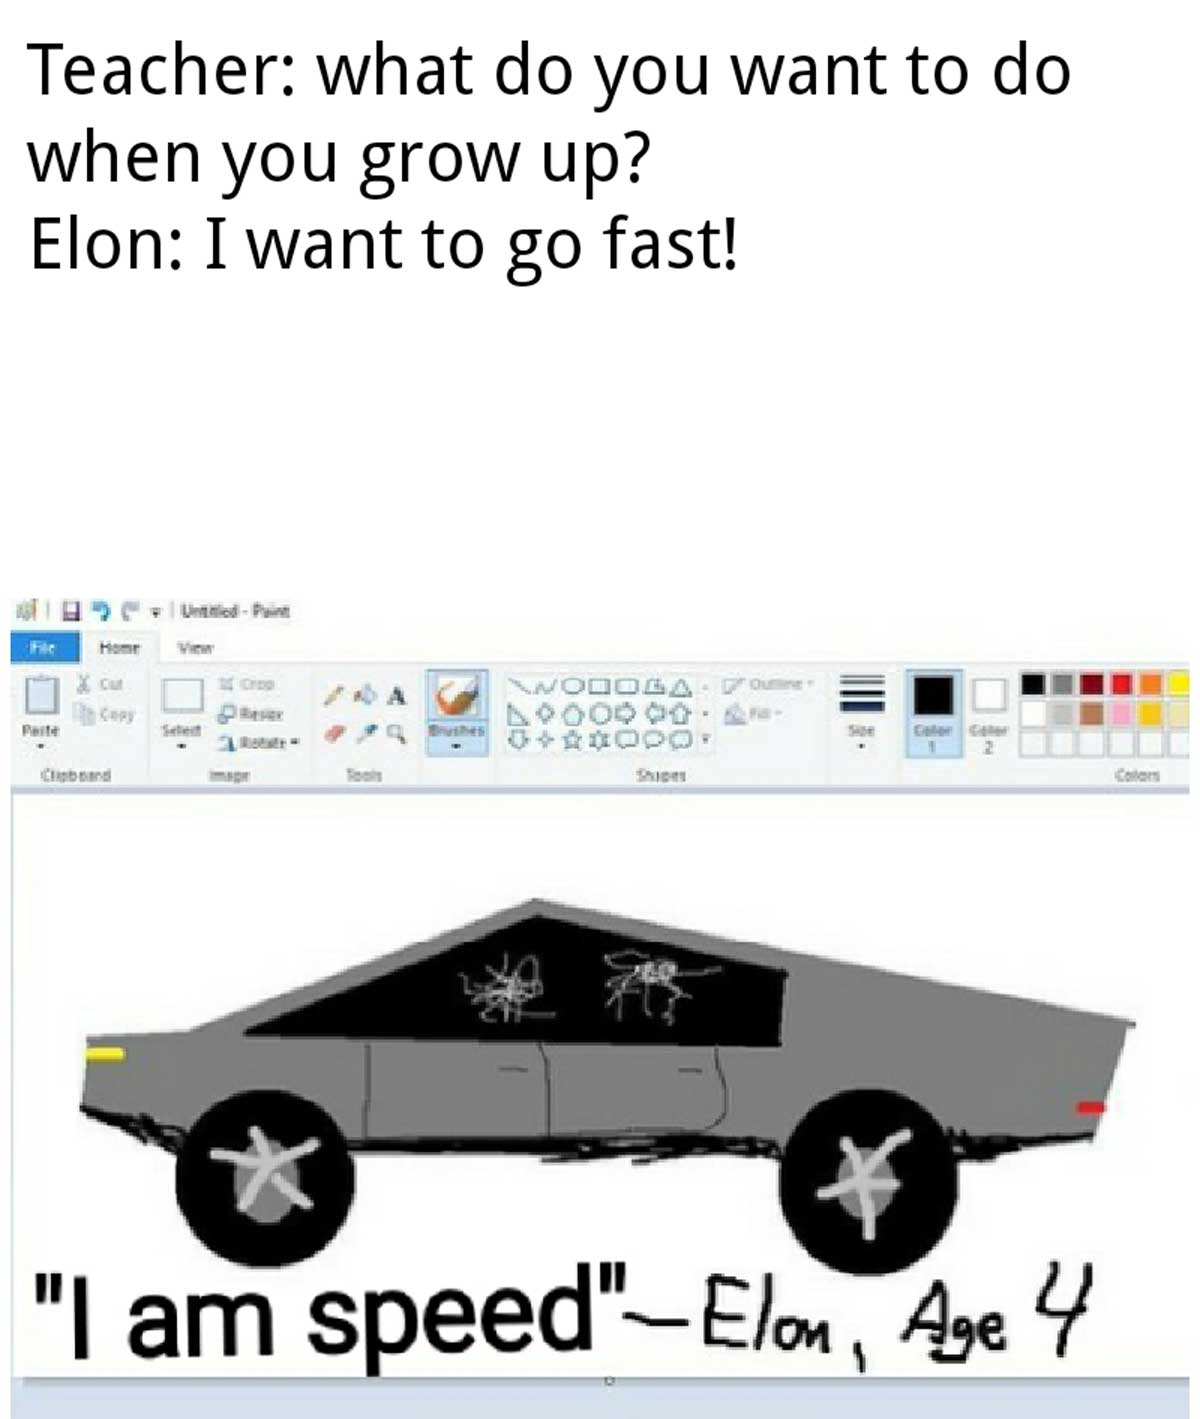 Tesla Cybertruck meme with the caption 'Teacher - what do you want to do when you grow up? Elon - I want to go fast' with a Cybertruck drawing in MS Paint with the text 'i am speed - elon age 4'